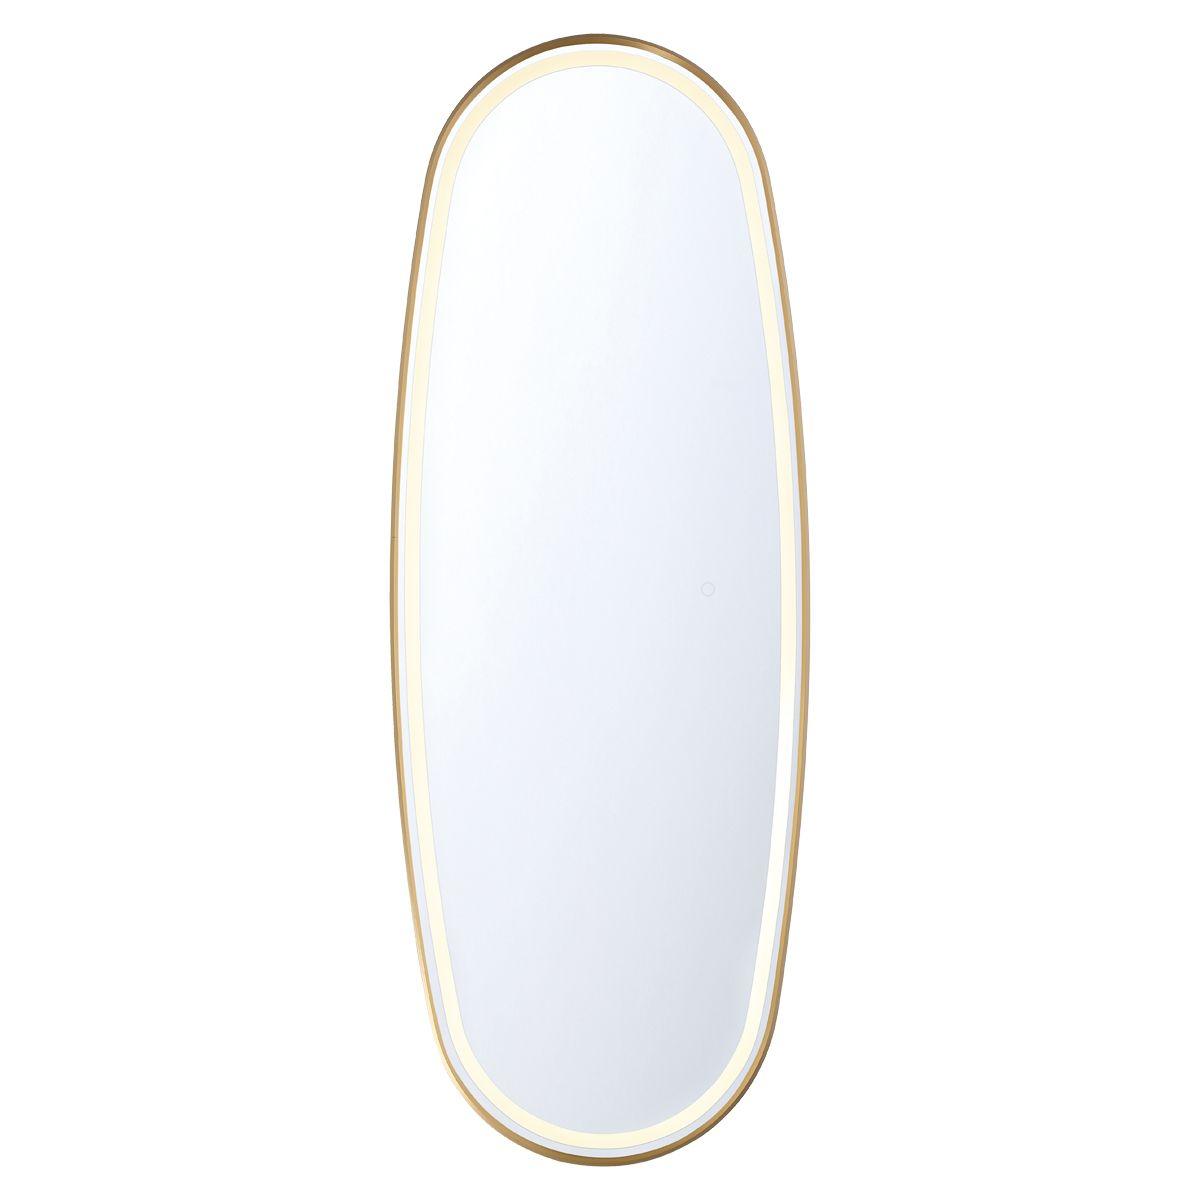 Obon 47 in. x 18 in. Framed LED Wall Mirror